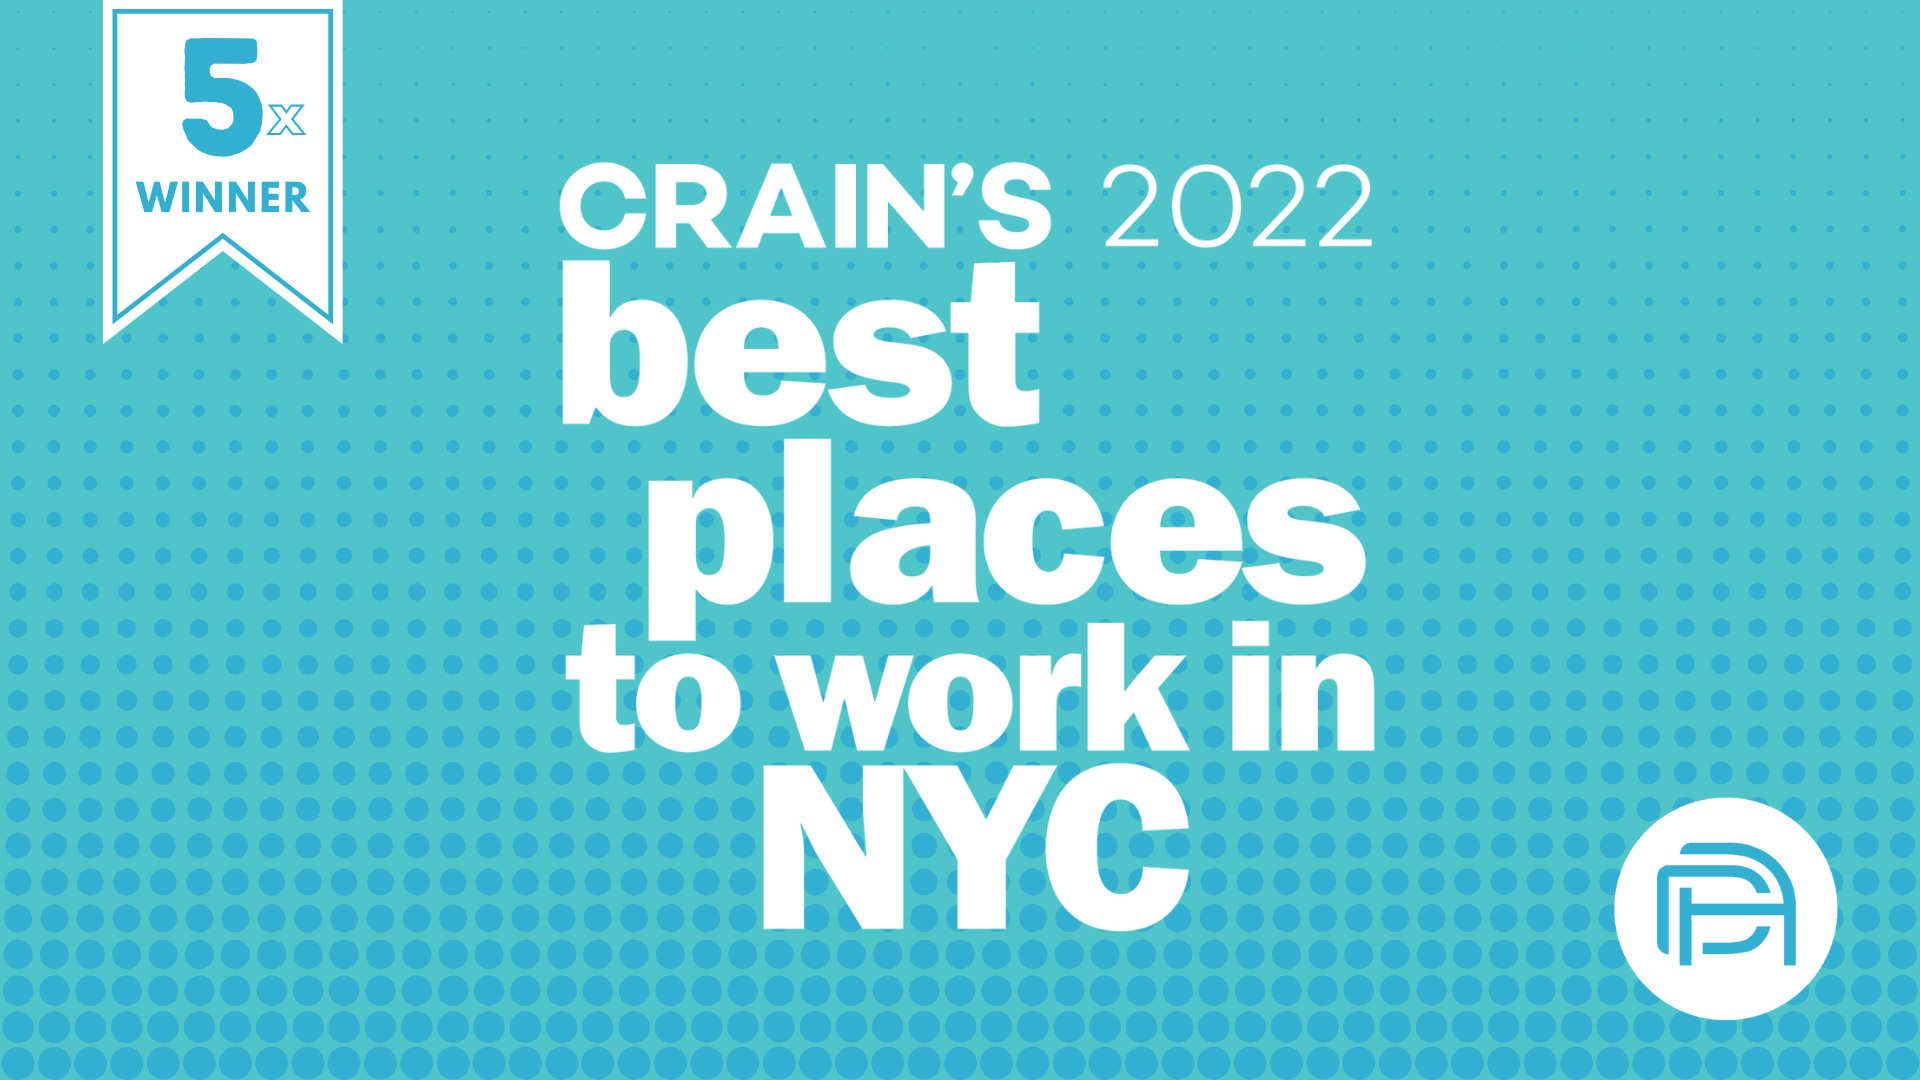 Direct Agents Named to Crain’s 2022 Best Places To Work in NYC